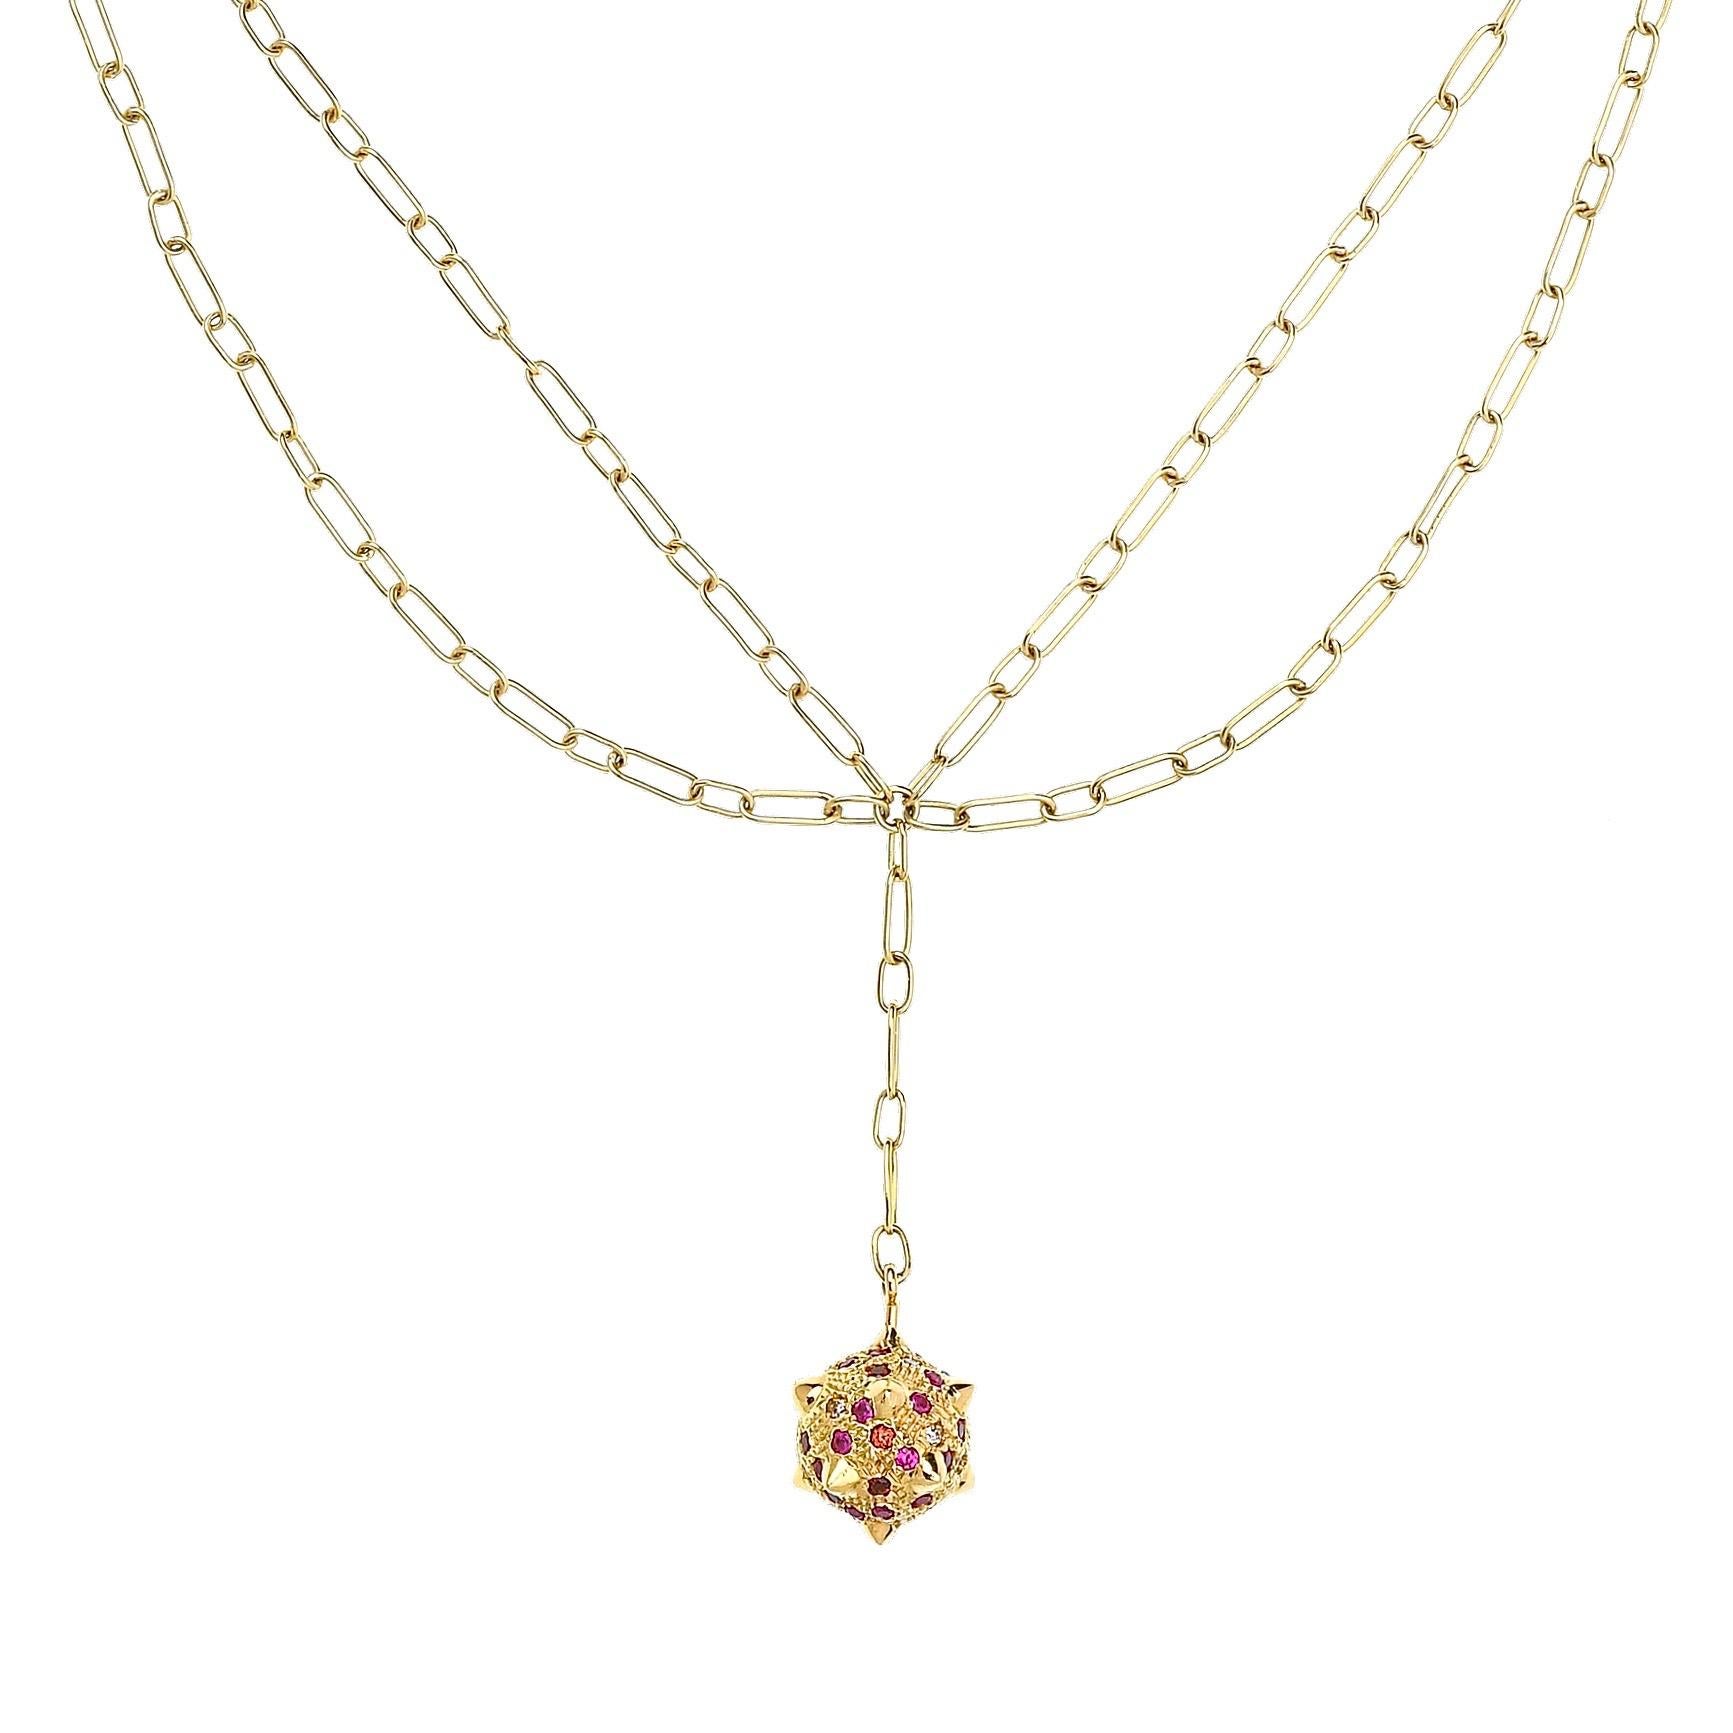 The ‘Morning Star’, double chain necklace is crafted in 18k yellow gold, hallmarked in Cyprus. This impressive neck piece comes in a highly polished finish and features Champaign Diamonds totalling 0,25 Cts, Rubies 0,6 Cts and Mandarin Garnets 0,2